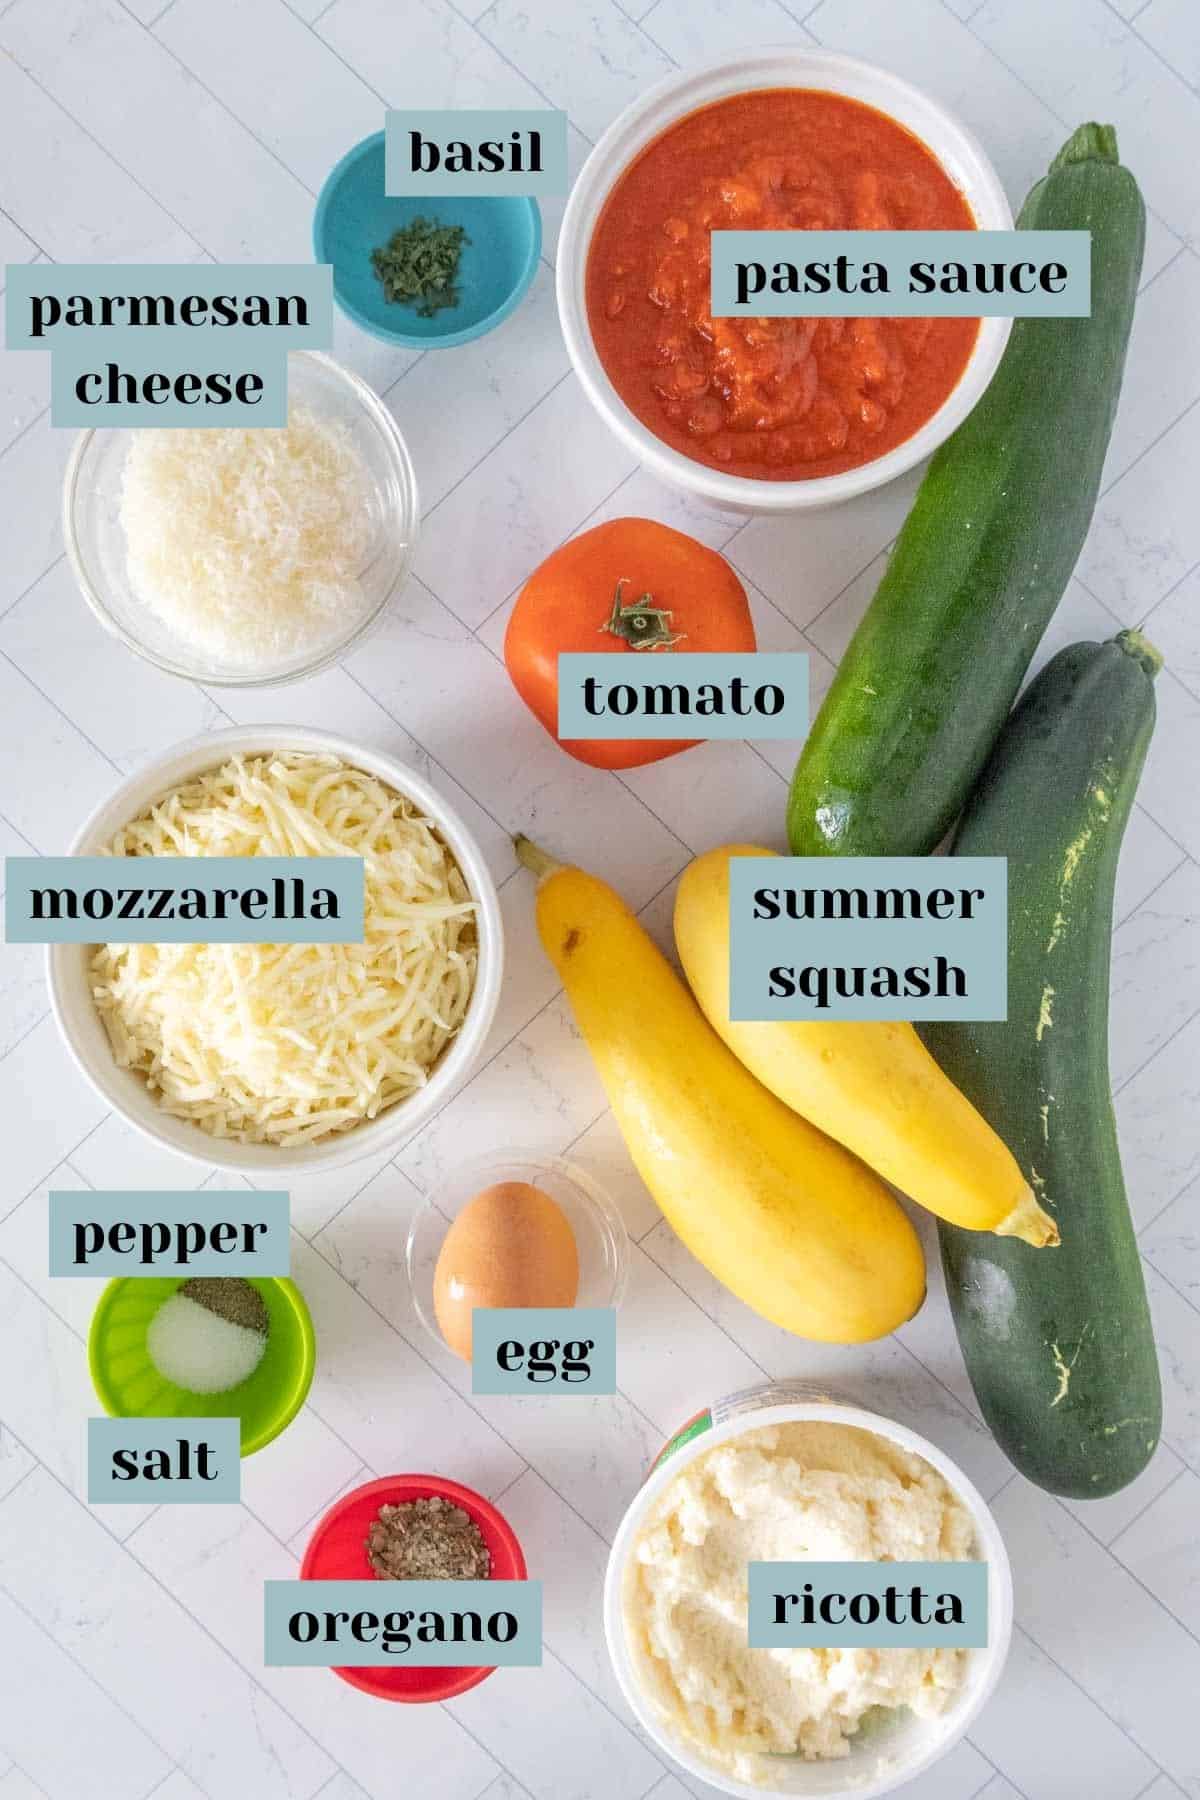 Ingredients for zucchini lasagna on a tile surface with labels.